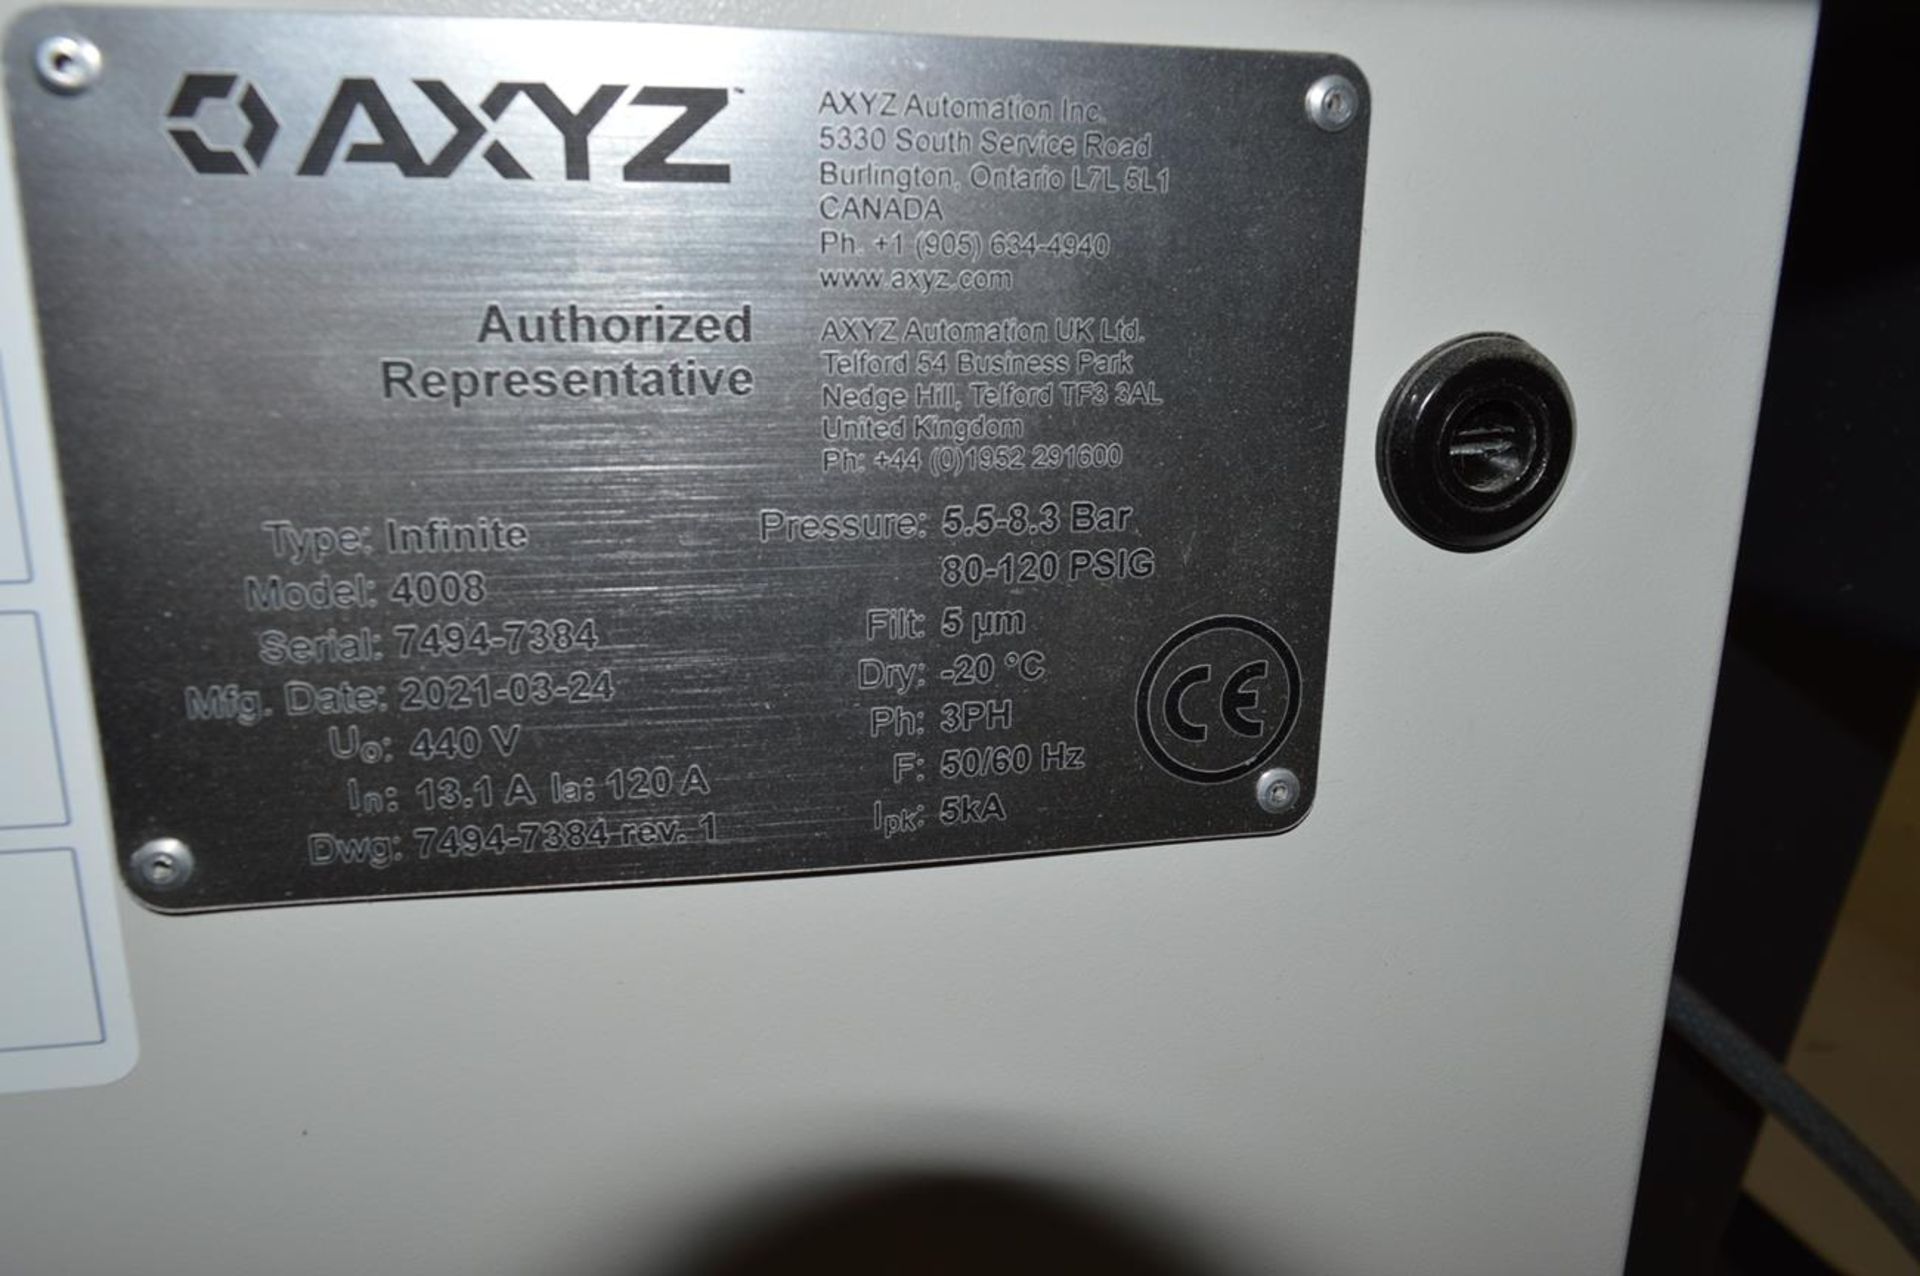 AXYZ, Infinate 4008ATC 3D router, 2m x 1.5m approx. table size, Serial No. 7494-7384 (DOM: 2021) - Image 7 of 7